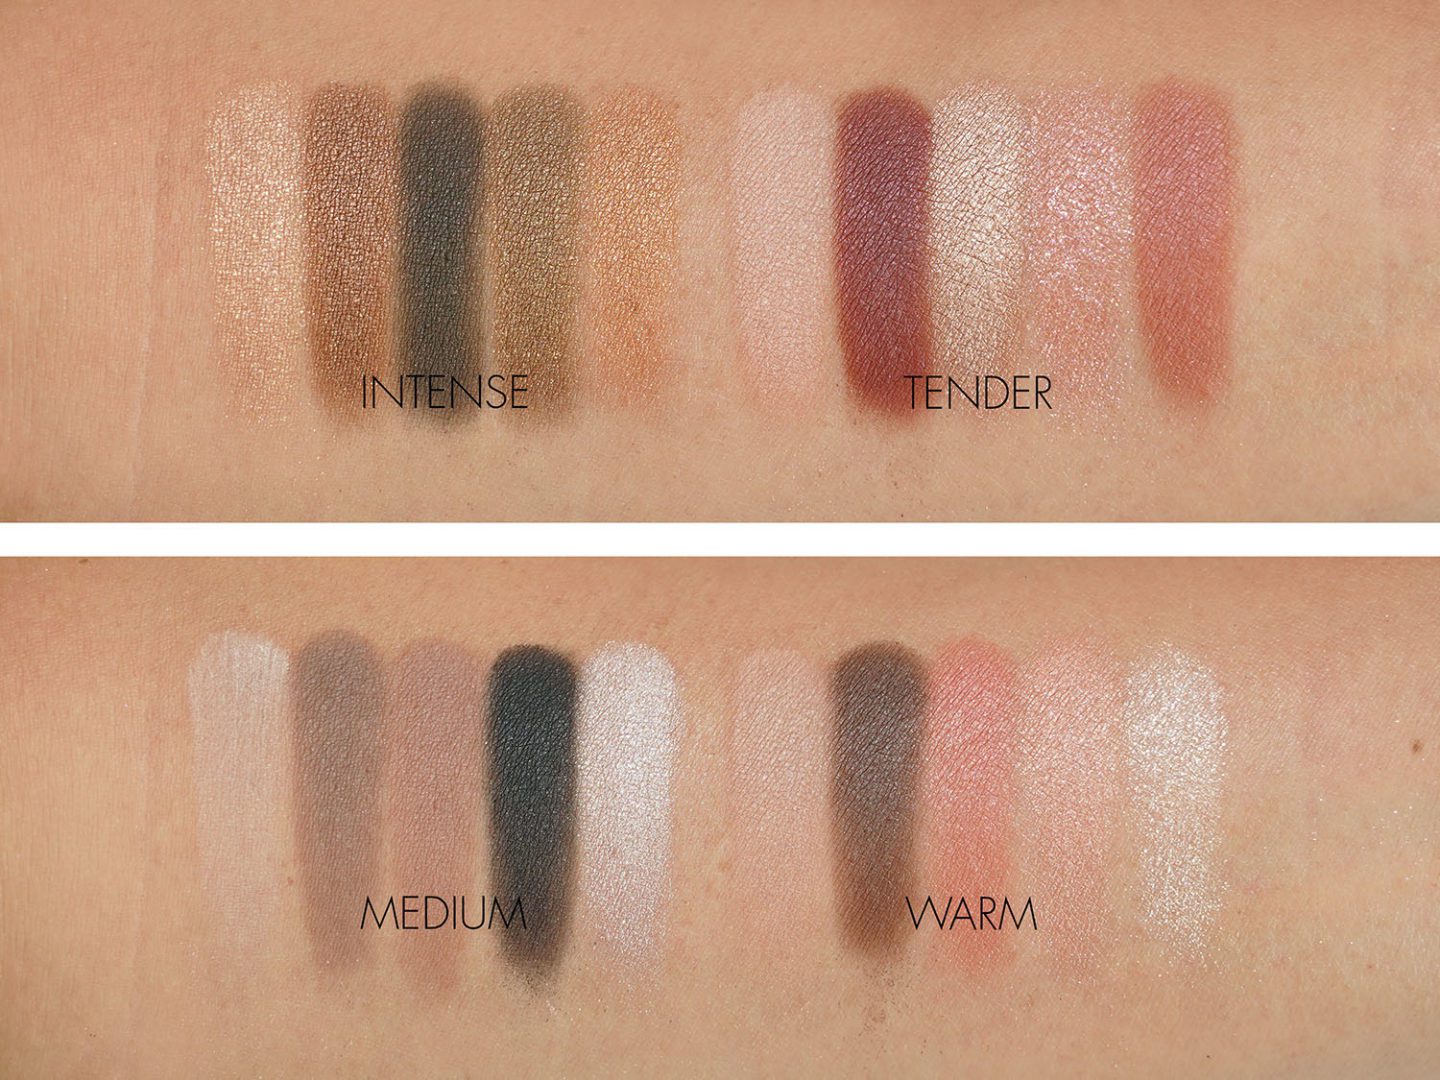 Chanel Les Beiges Healthy Glow Natural Eyeshadow Palette swatches